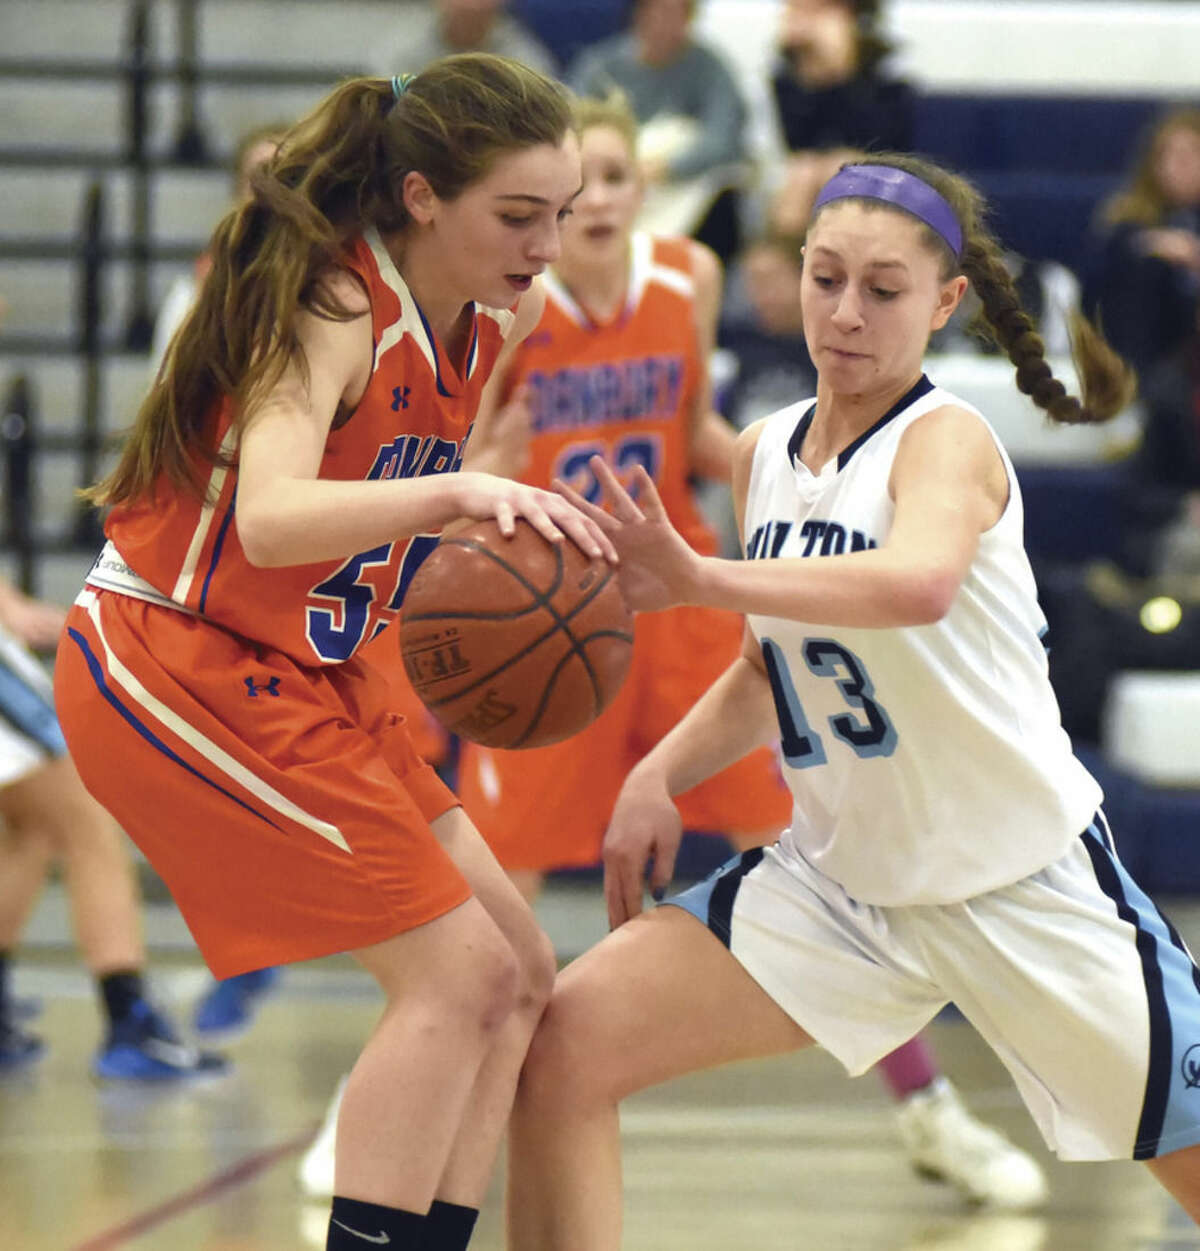 Hour photo/John Nash - Wilton's Makenna Pearsall, right, steals the ball from Danbury's Emily Broggy during Thursday's FCIAC girls basketball game in Wilton. The host Warriors won the game, 67-25.